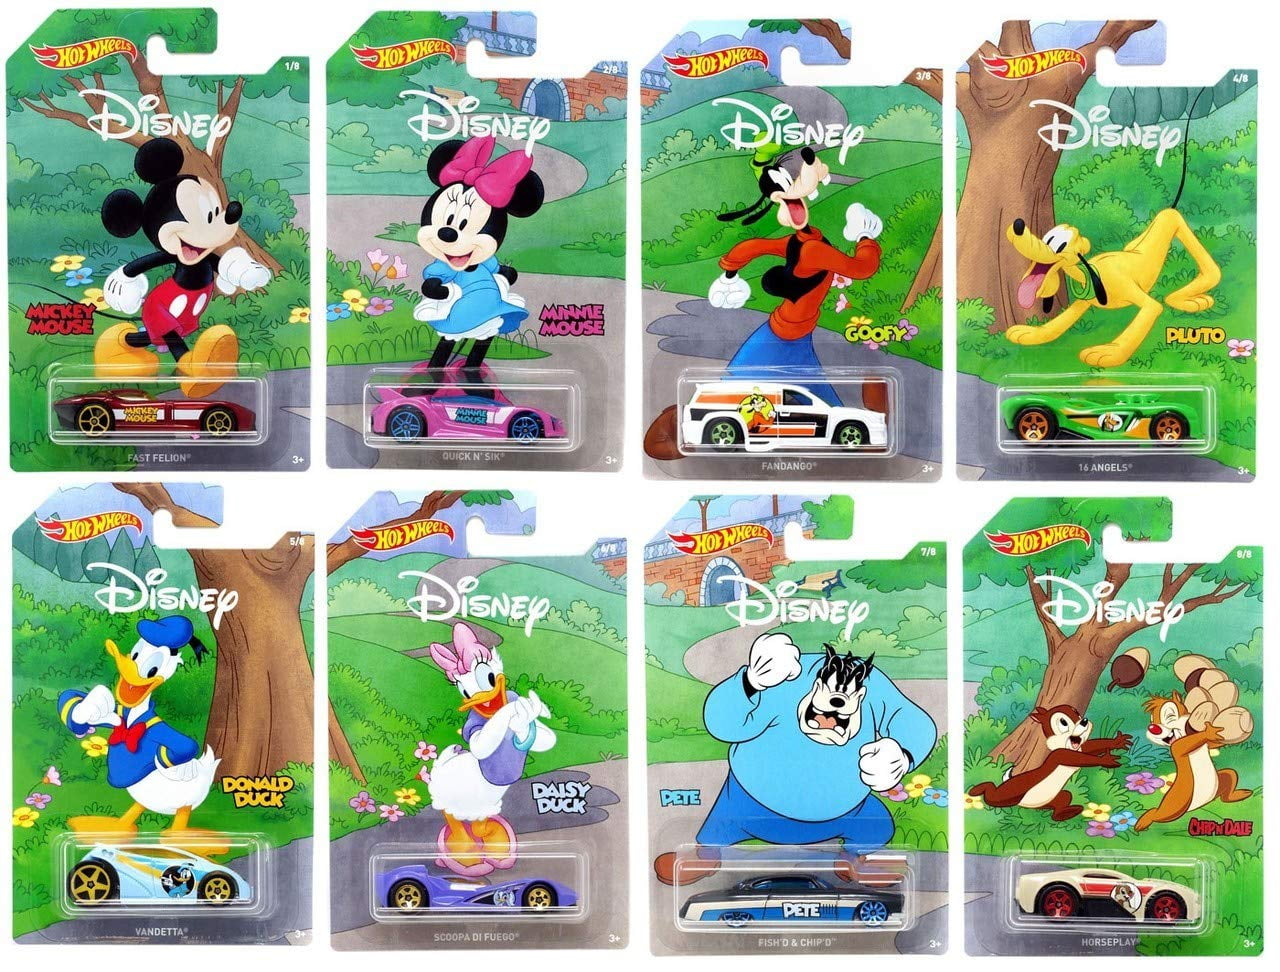 Set of 5 Hot Wheel 2019 Disney Anniversary 90th Mickey Mouse Exclusive Edition with Black & Gold Bonus Die-Cast Vehicles 1:64 Scale Gift Pack Collectible